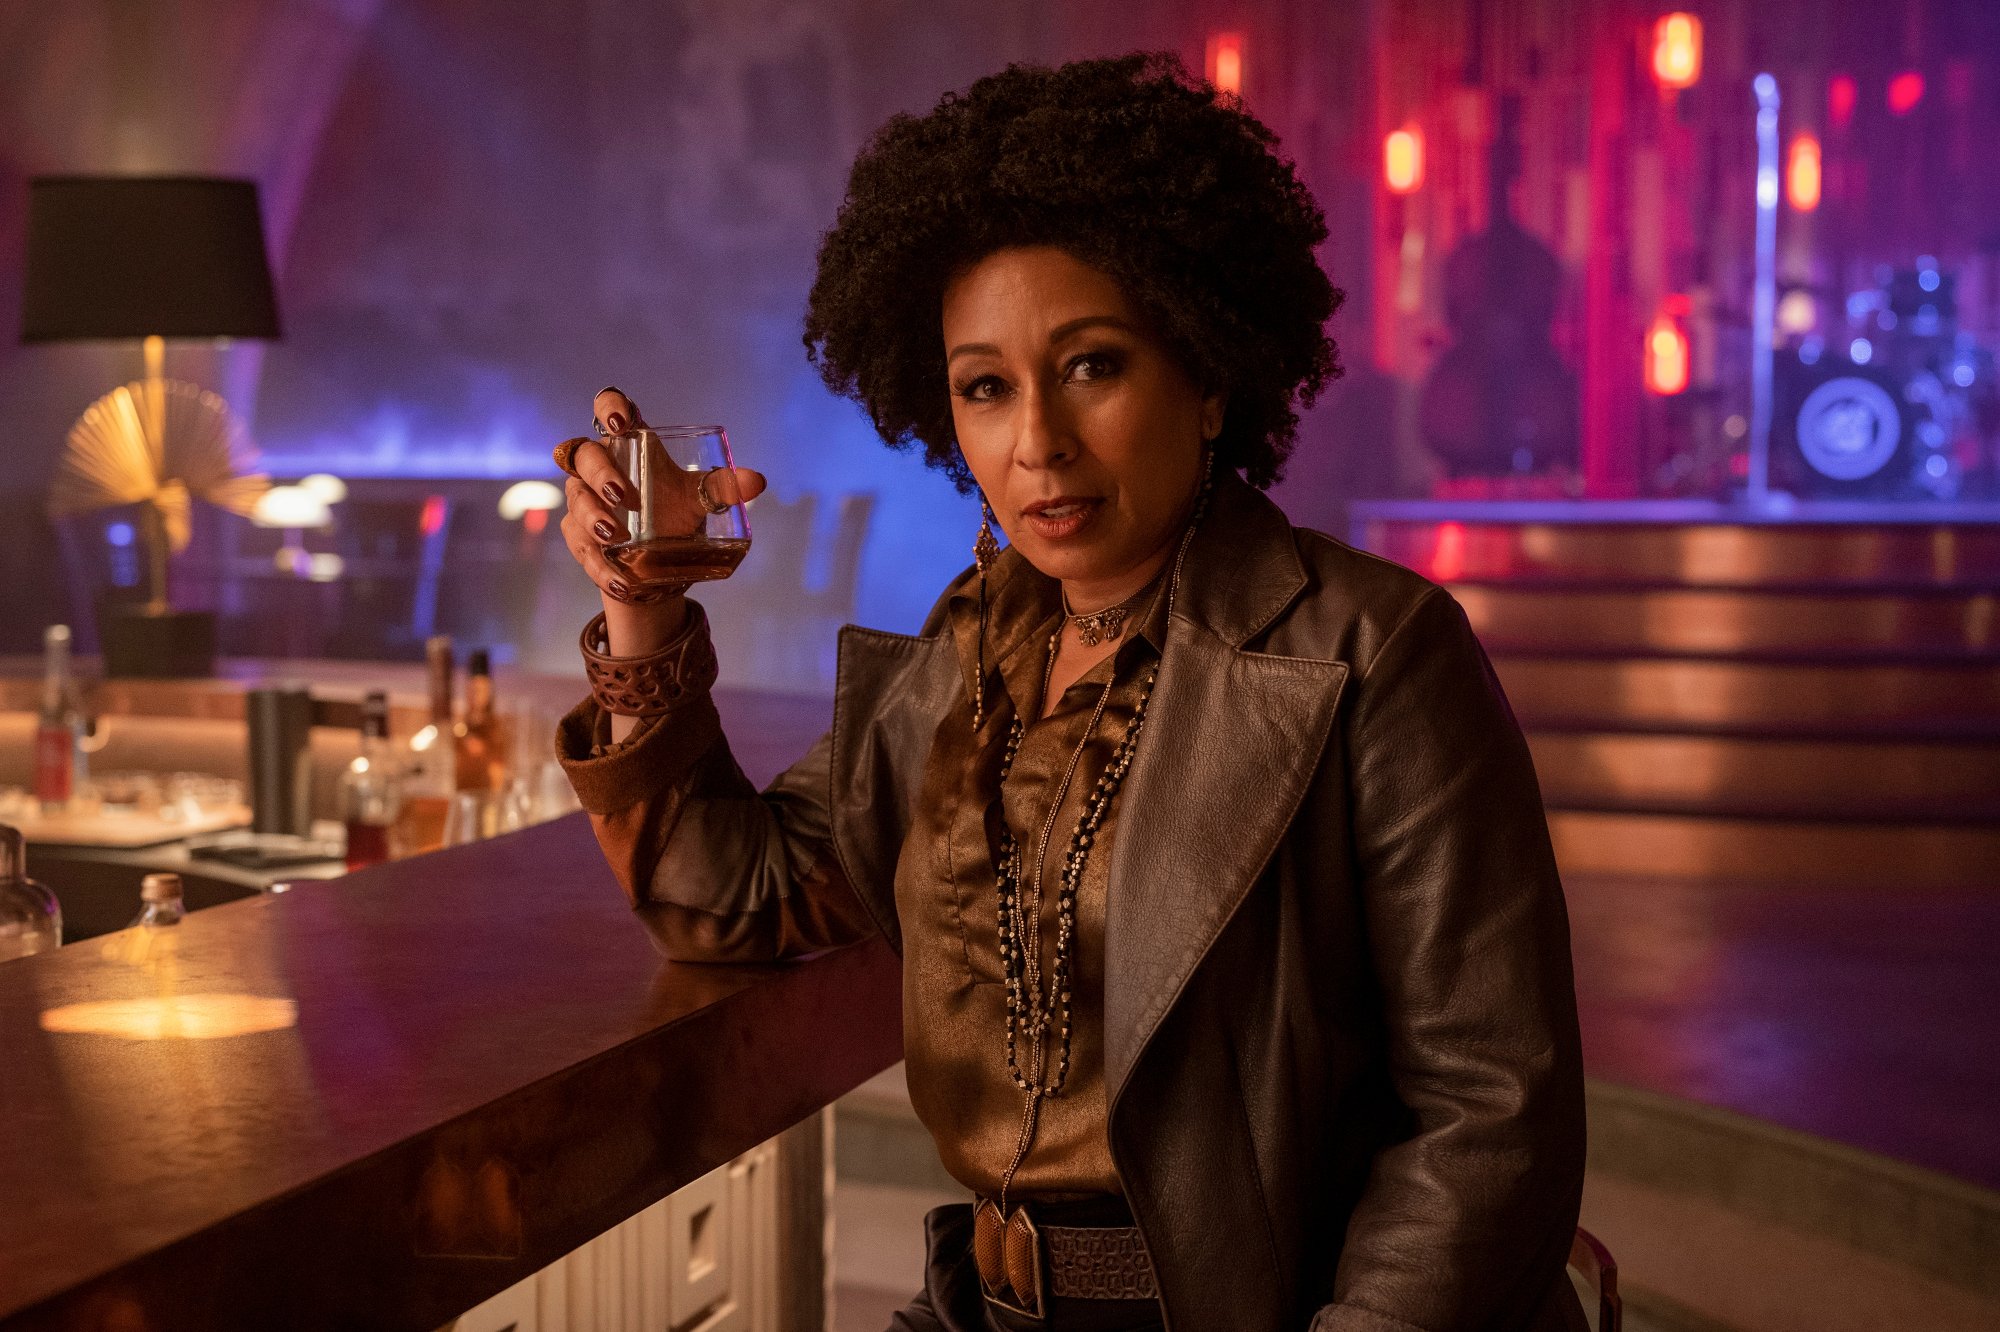 Tamara Tunie as Ana in Netflix's live-action 'Cowboy Bebop.' She's sitting at a bar and holding a glass.